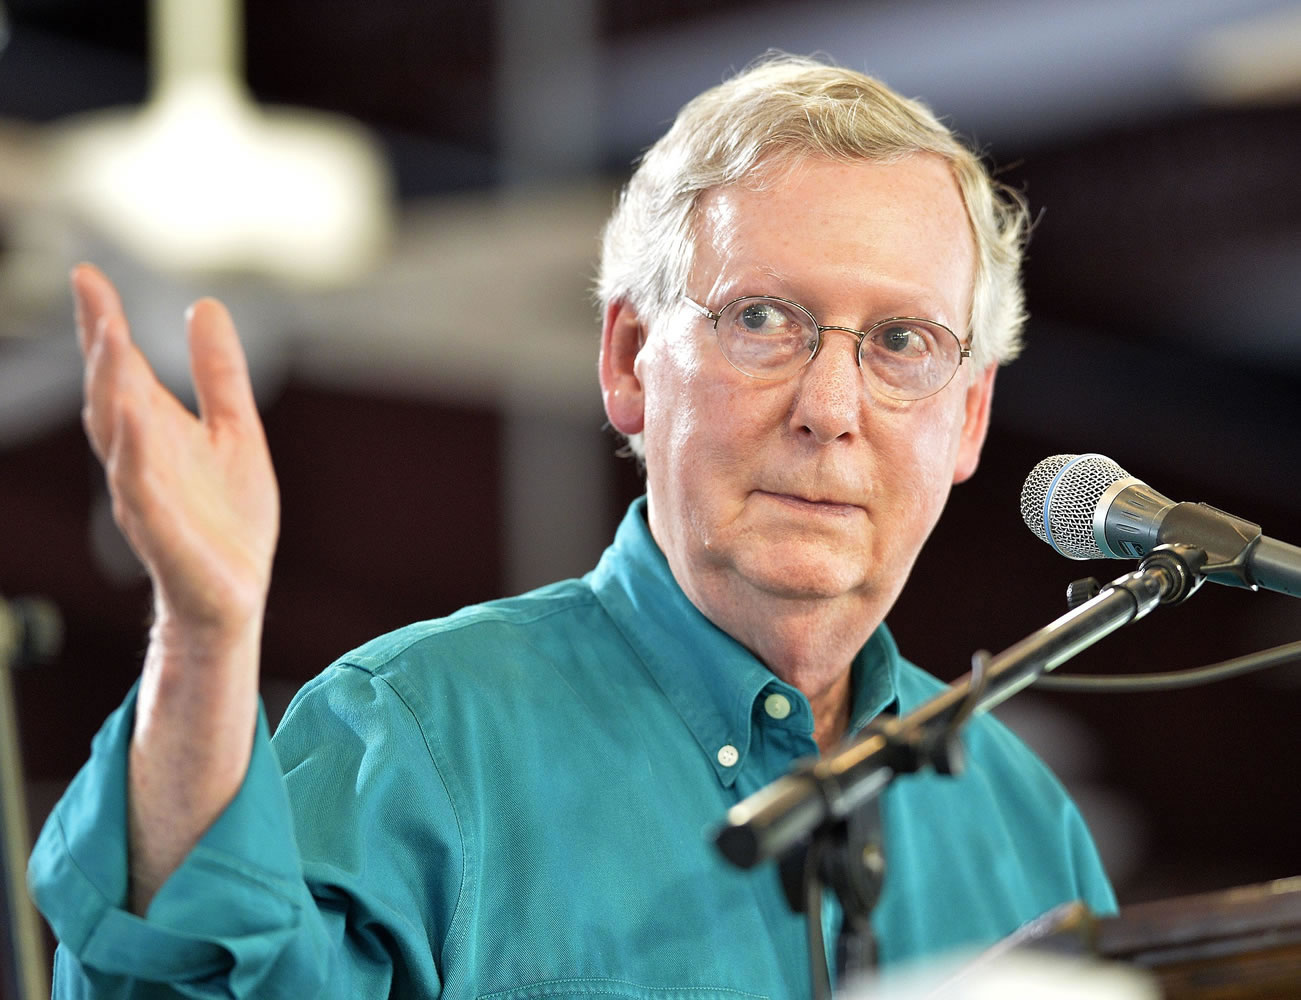 Senate Majority Leader Mitch McConnell, R-Ky., speaks to the attendees at the Fancy Farm Picnic in Fancy Farm, Ky.